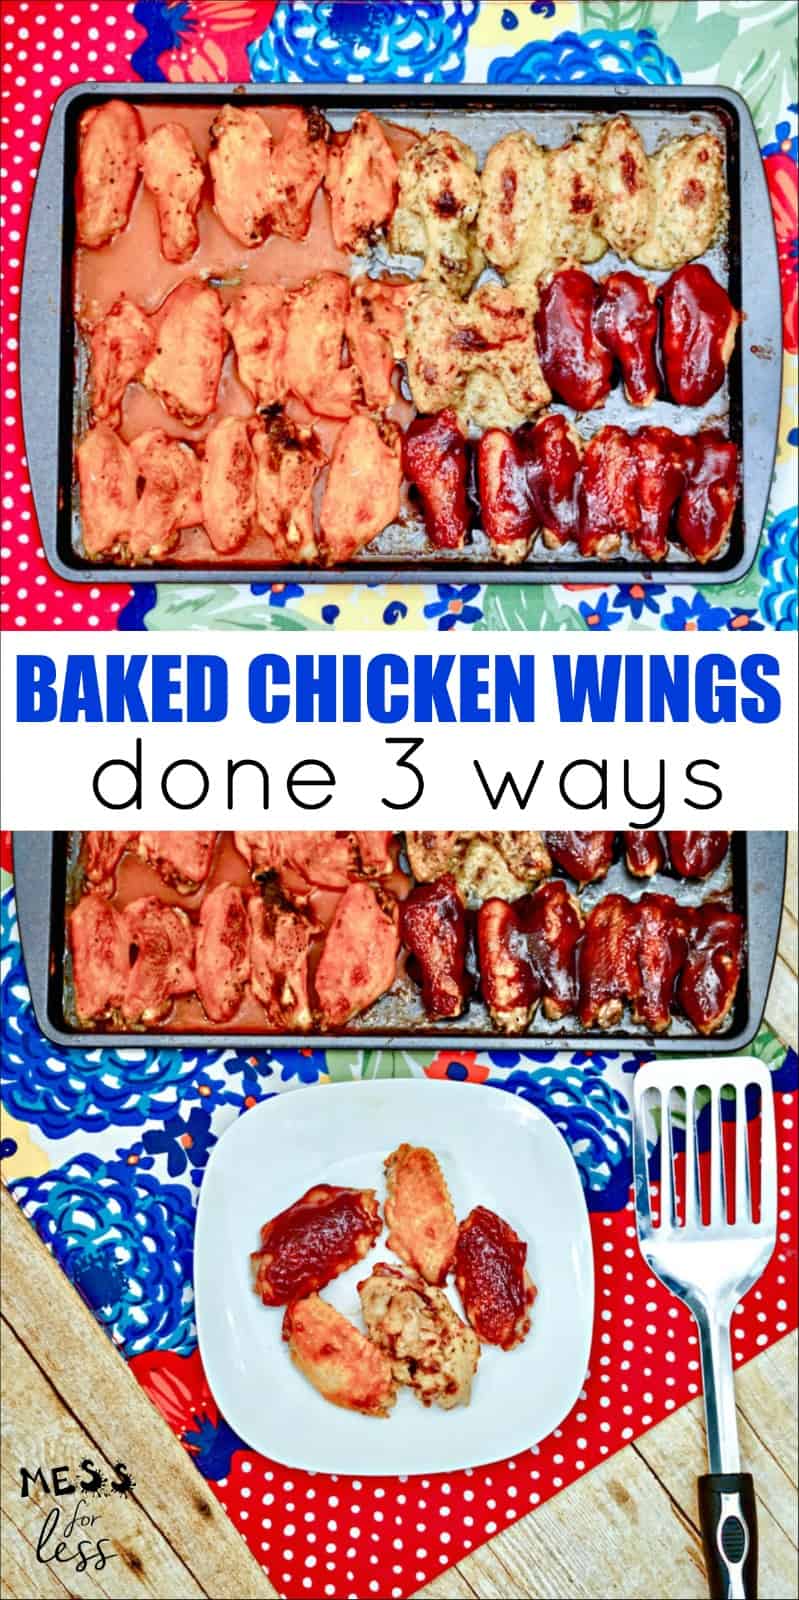 Oven Baked Chicken Wings - 3 Ways! Can't decide on what variety of wings to make for that party or gathering? Make them all! Easy baked chicken wings are a hit! 